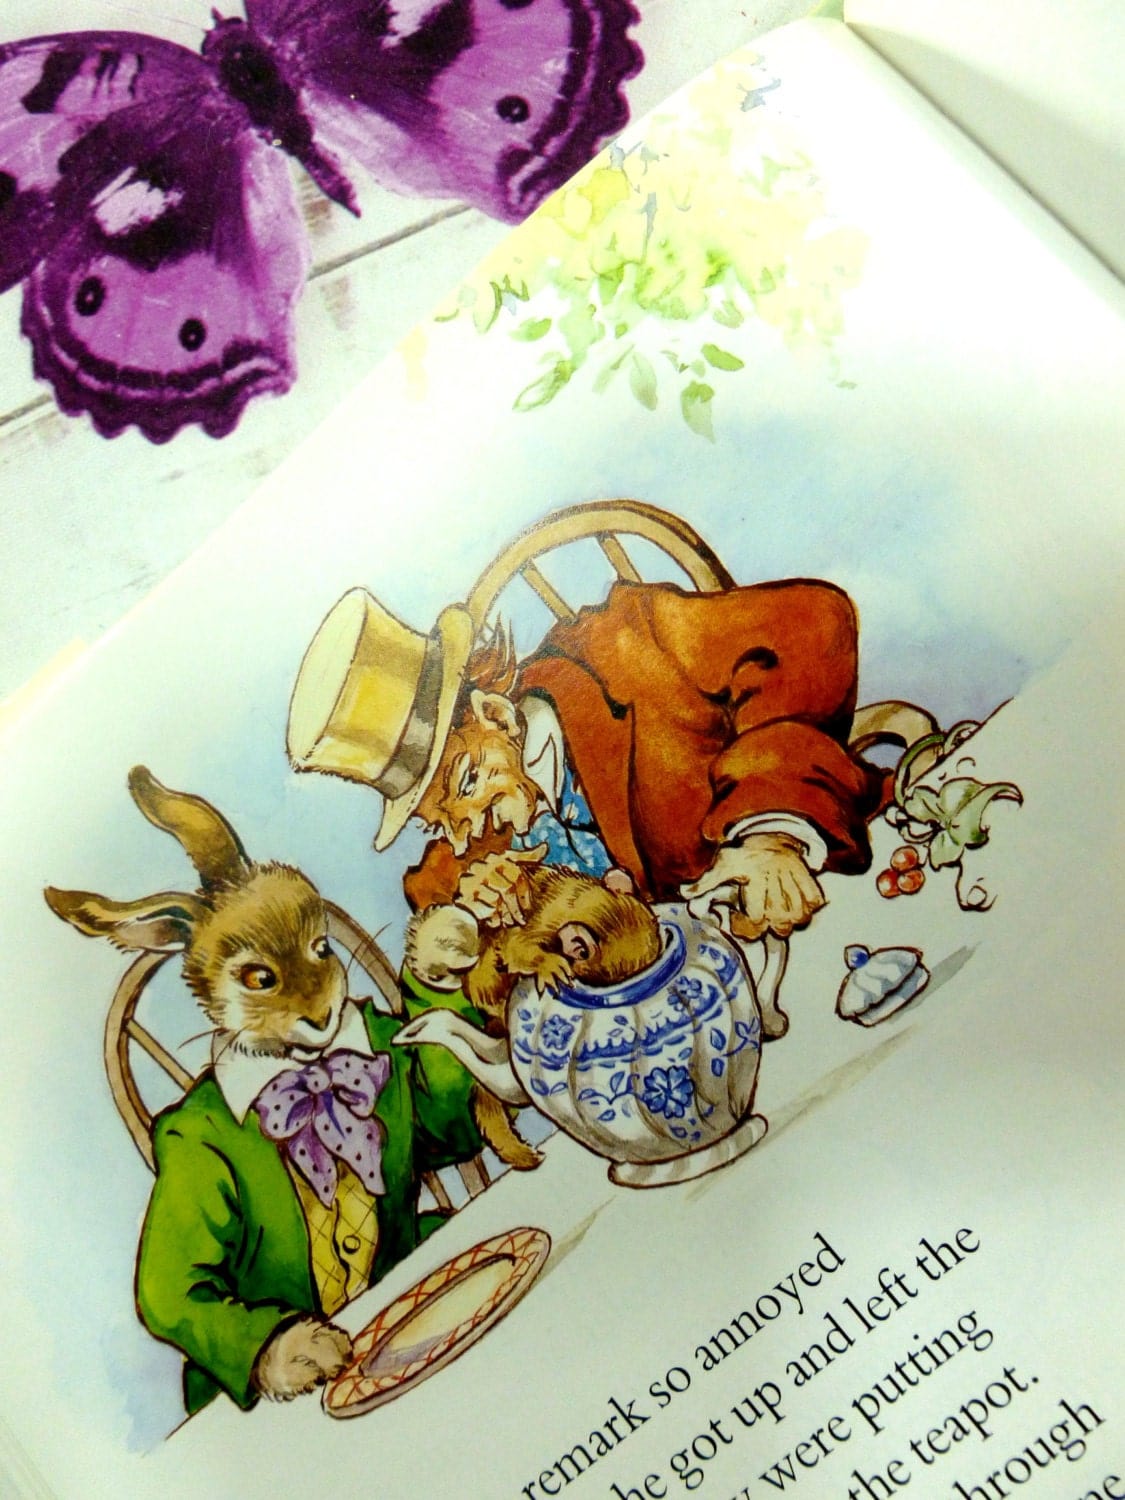 The Mad Hatter, Rabbit and Dormouse in a Teapot illustration from vintage Alice in Wonderland book by Rene Cloke. 